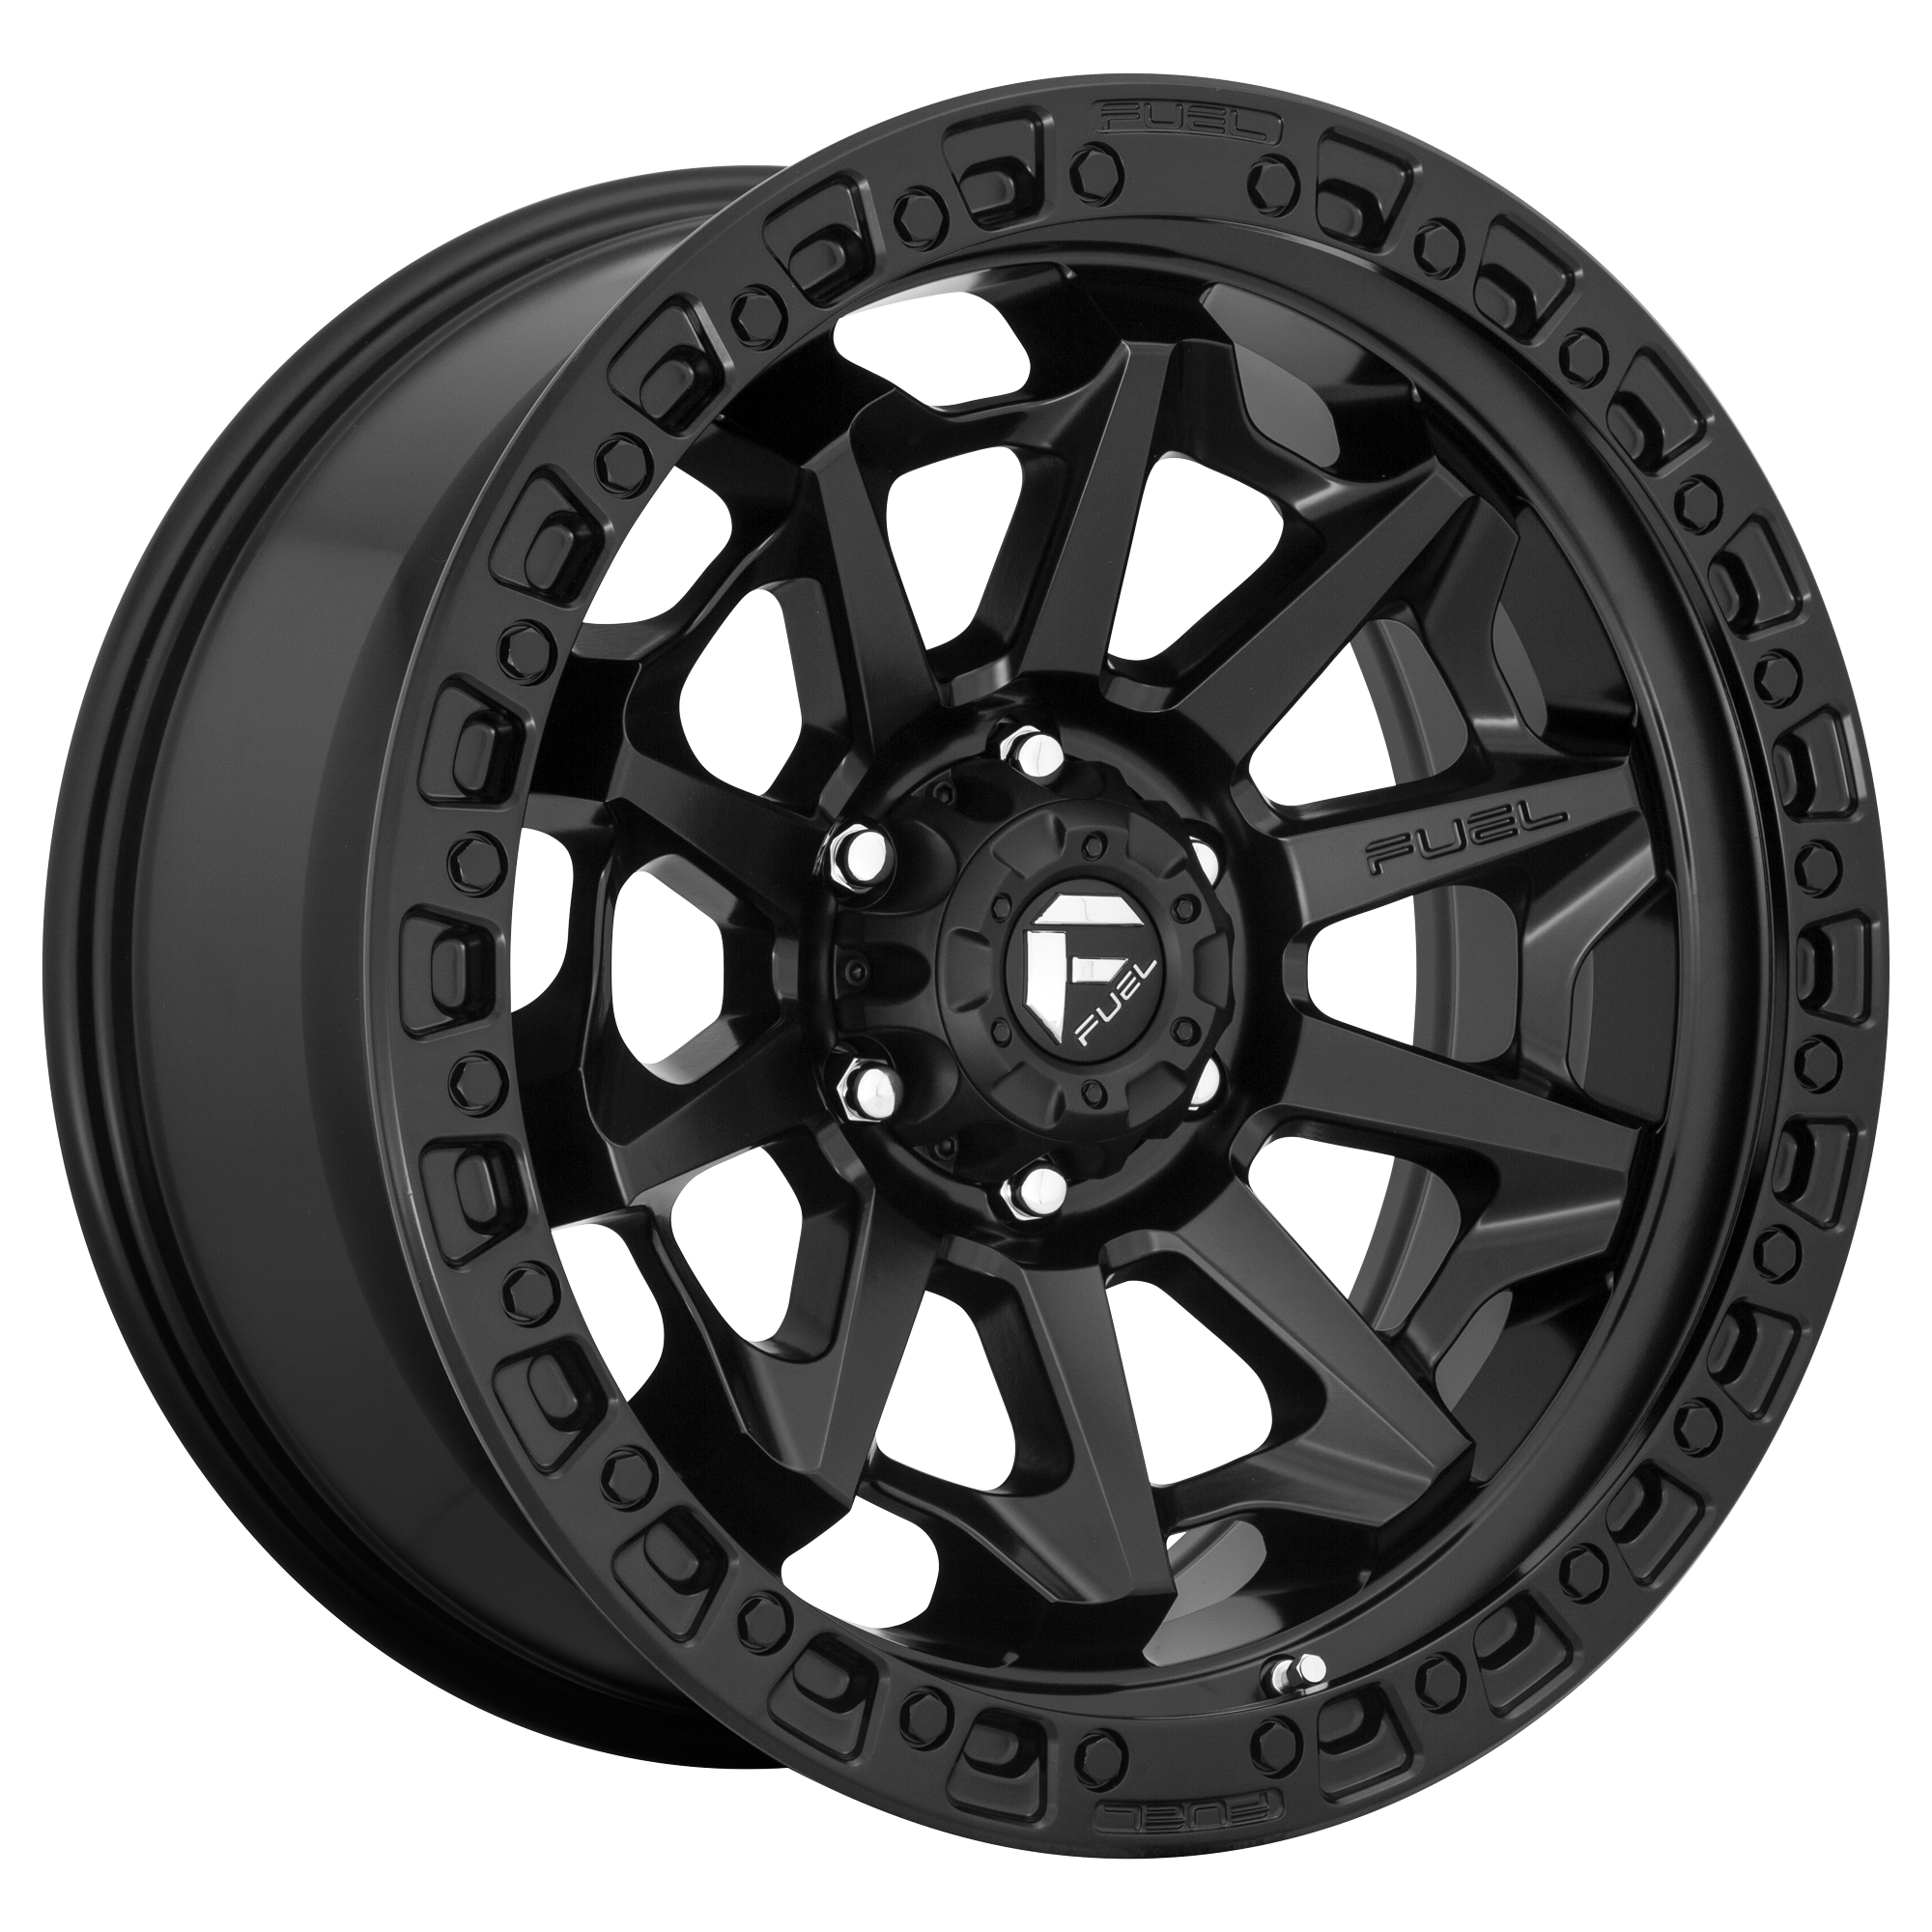 COVERT 17x9 6x139.70 MATTE BLACK (-12 mm) - Tires and Engine Performance